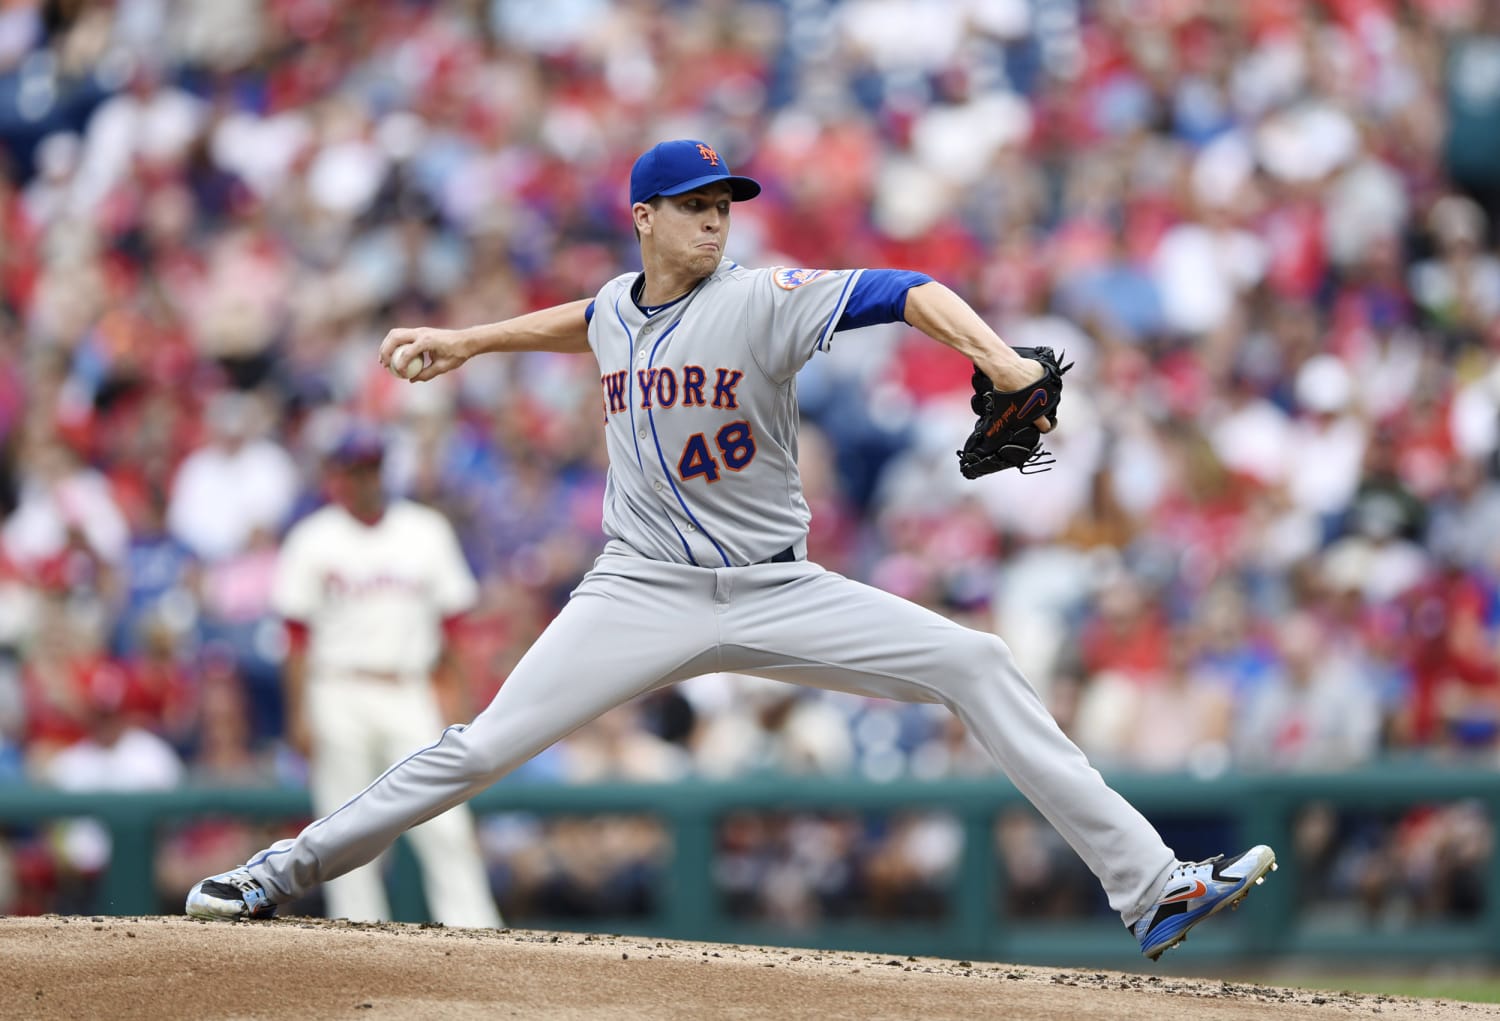 Mets pitcher Jacob deGrom deserves the Cy Young Award. Will his